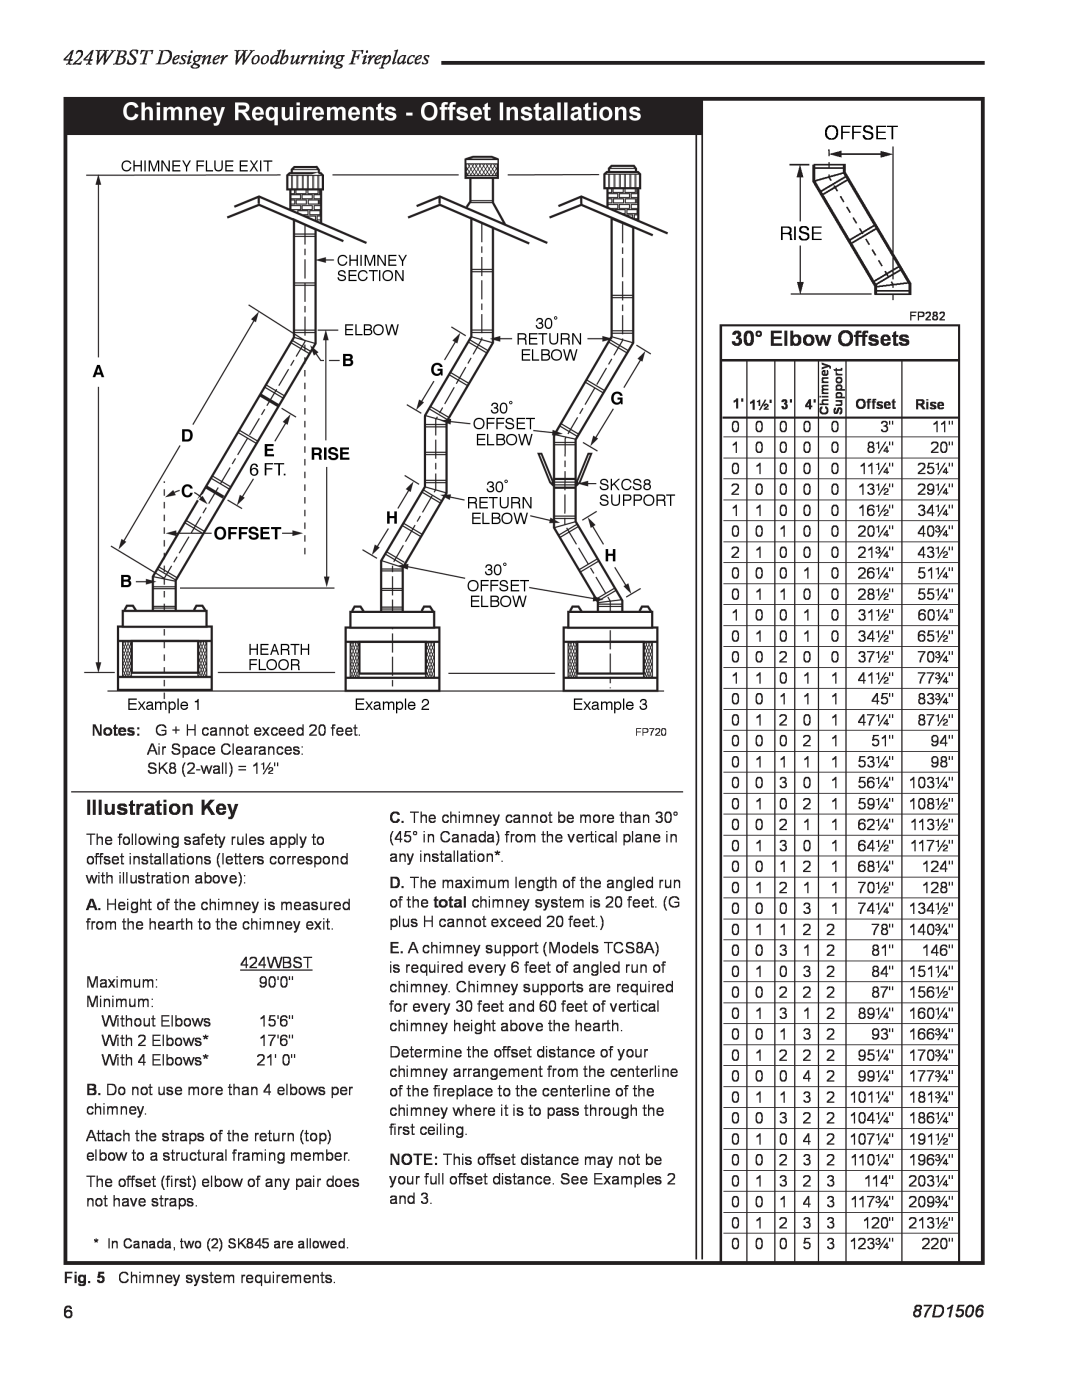 Monessen Hearth 424WBST Chimney Requirements - Offset Installations, Elbow Offsets, Illustration Key, Offset Rise, 87D1506 